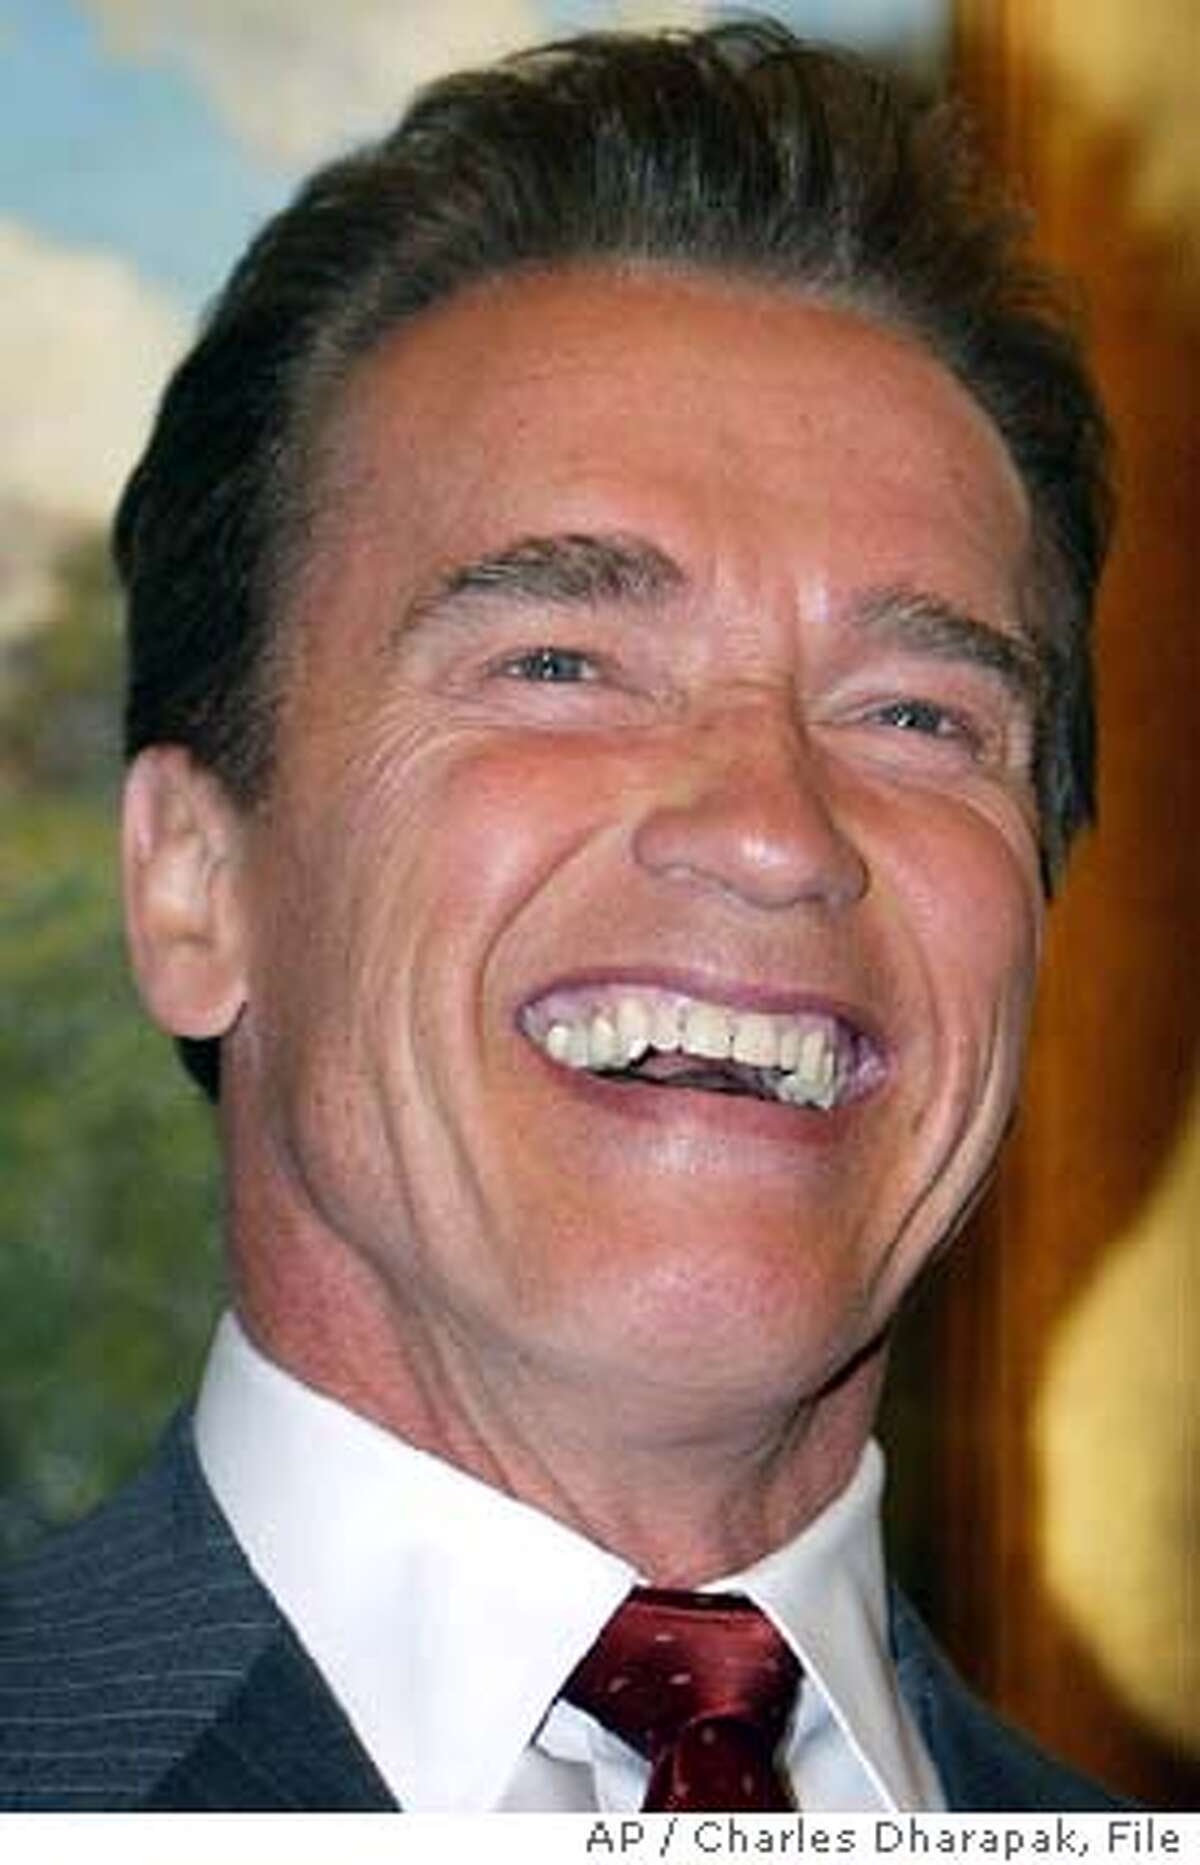 ** FILE **California Gov. Arnold Schwarzenegger reacts to a question while meeting with reporters Feb. 24, 2004, in Washington. . Schwarzenegger will return to the big screen next year to make a cameo in a comedy written and produced by friend Tom Arnold. Schwarzenegger said he's in "The Kid and I" during an appearance Monday, Dec. 13, 2004, on Fox's "The Best Damn Sports Show Period," which is co-hosted by Arnold. (AP Photo/Charles Dharapak, File)